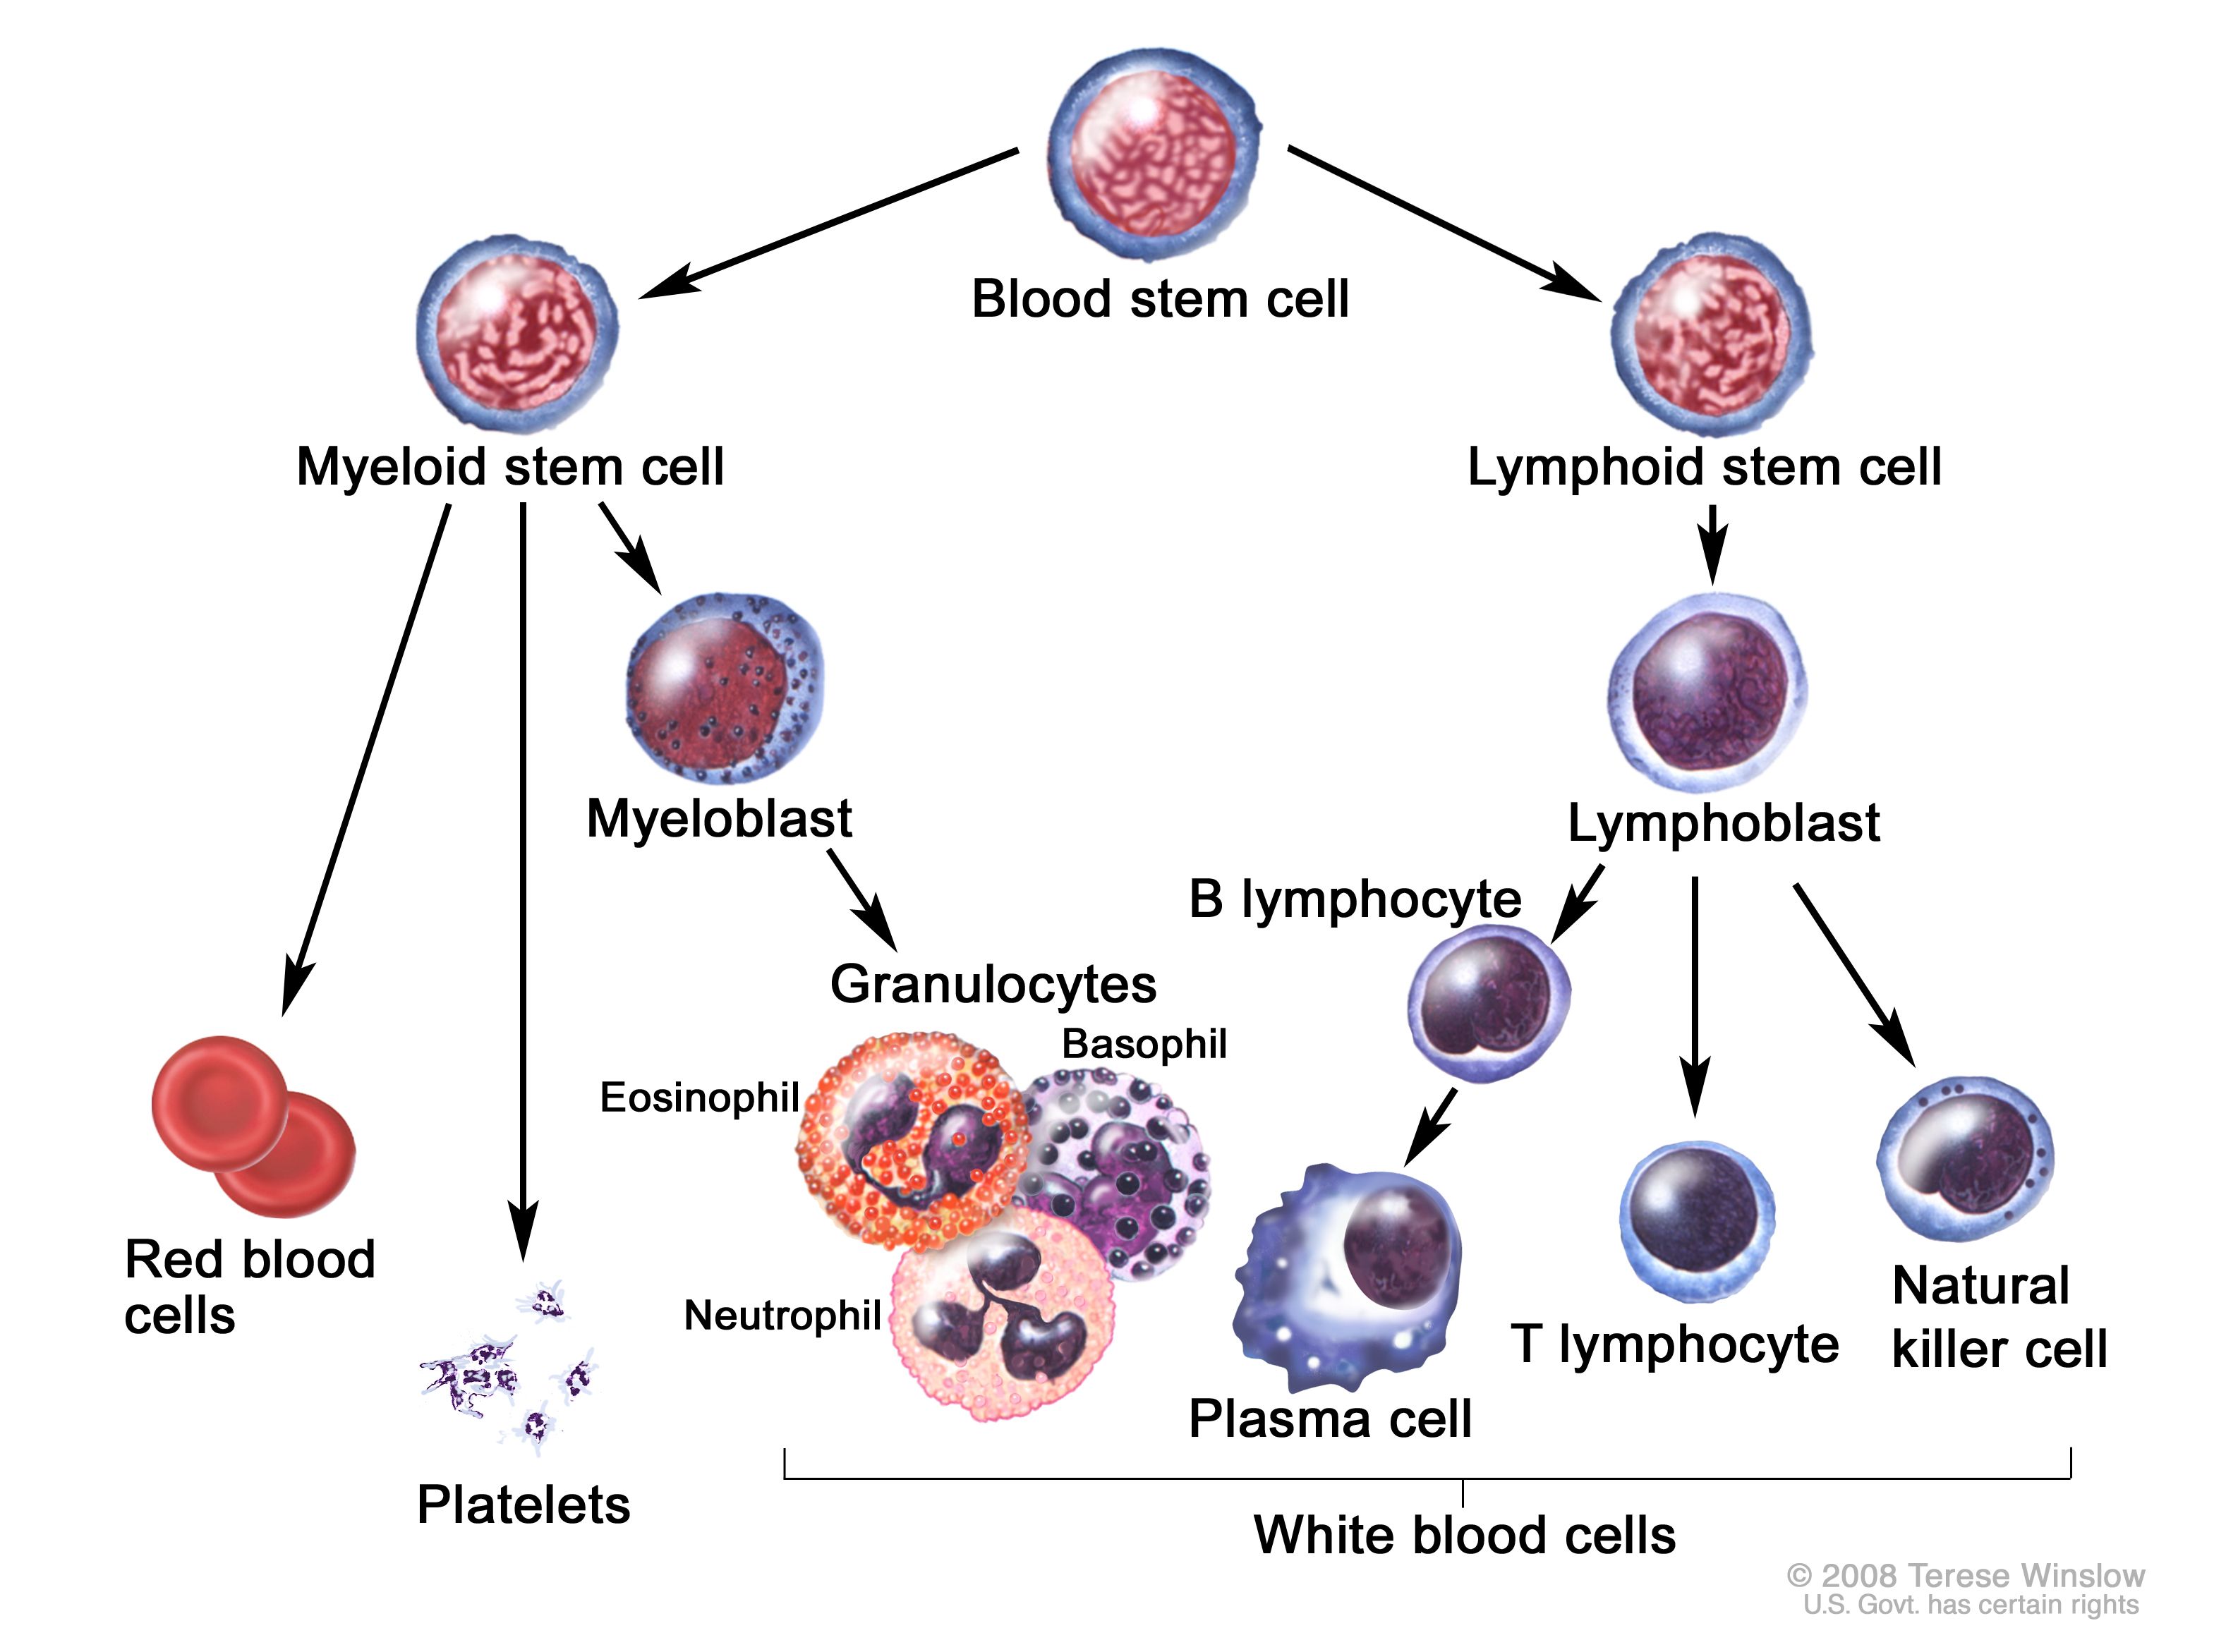 Definition of plasma cell - NCI Dictionary of Cancer Terms - NCI